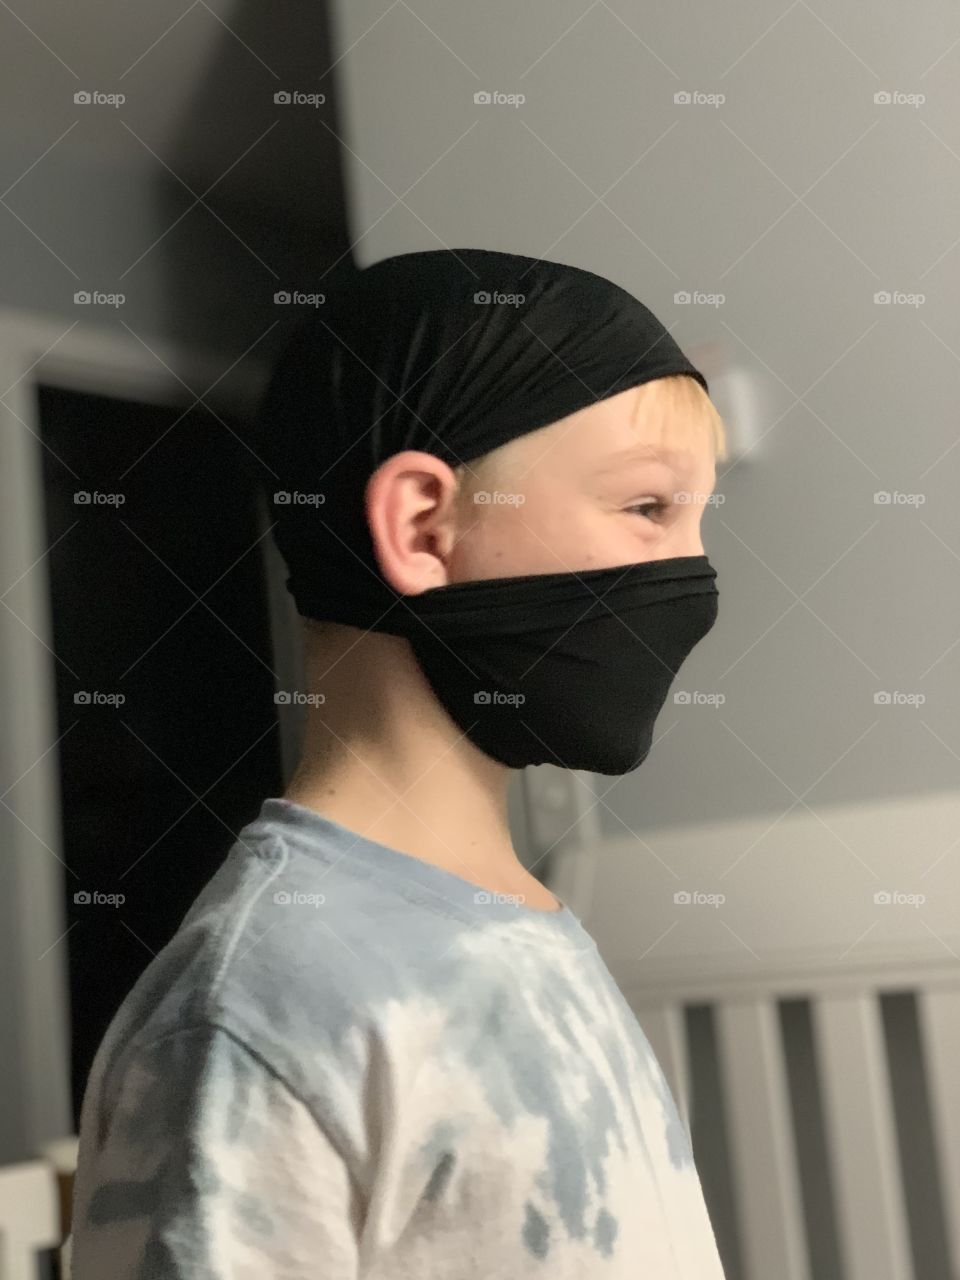 If you have to wear a mask, embrace your inner ninja 